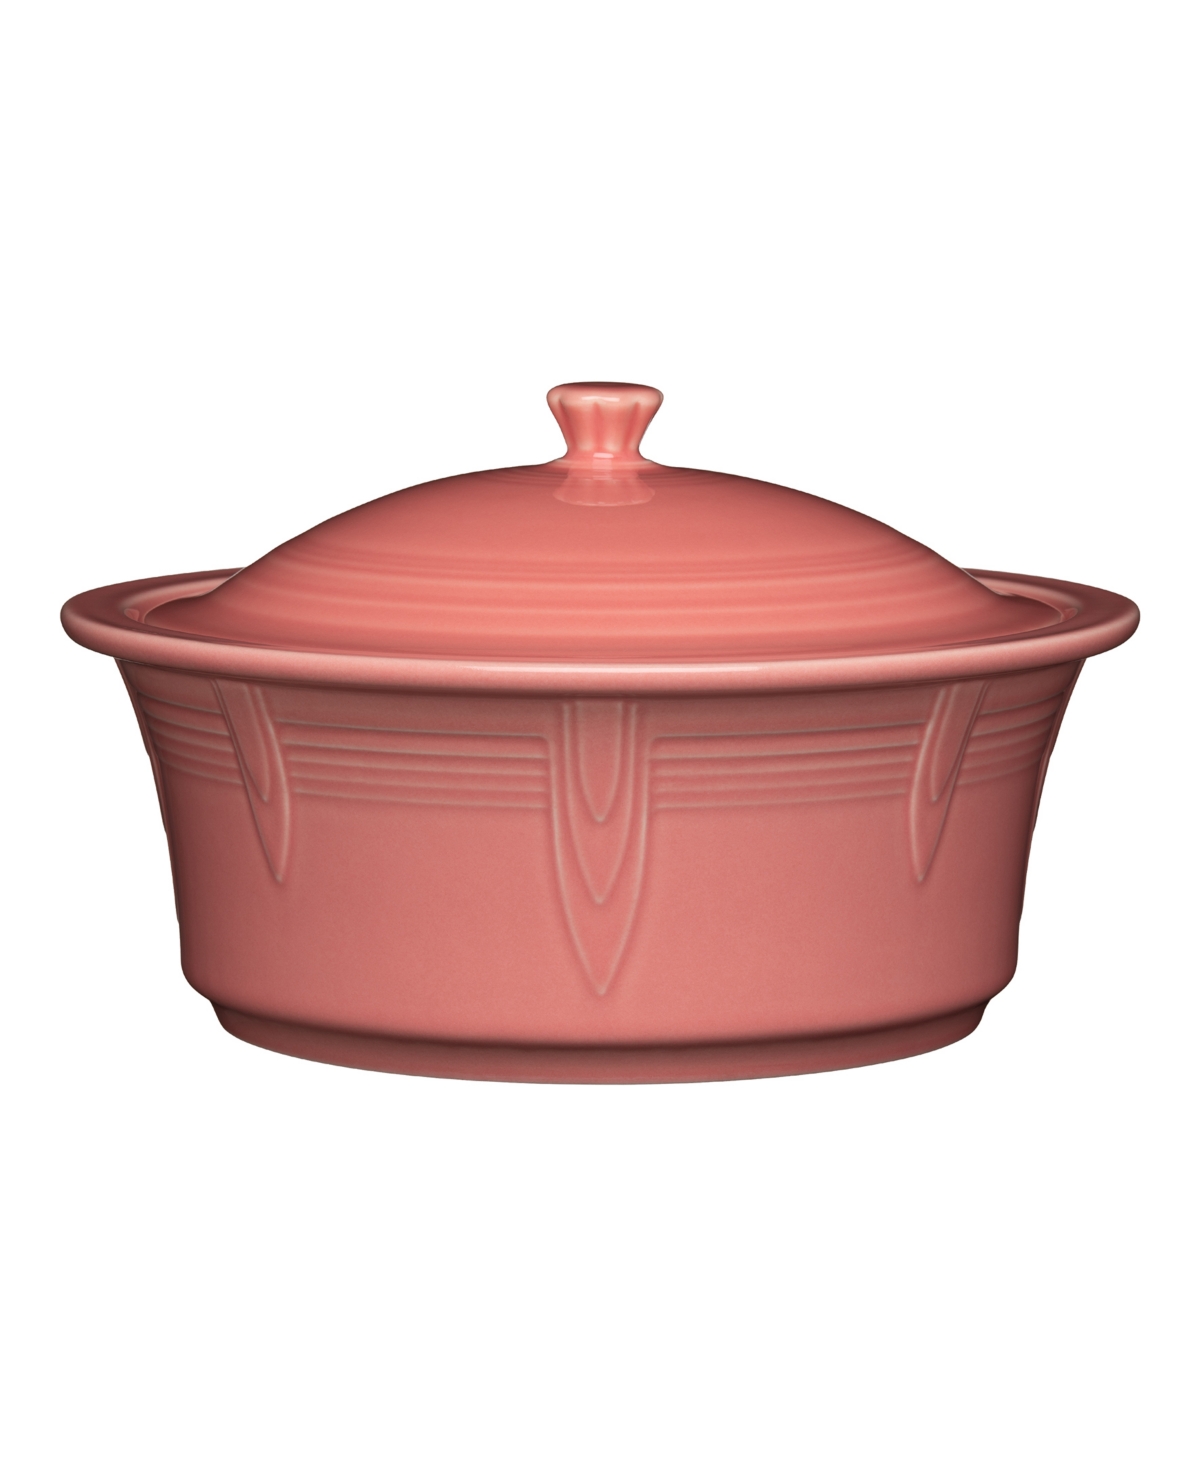 Fiesta Large Covered Casserole 90 Oz. In Peony